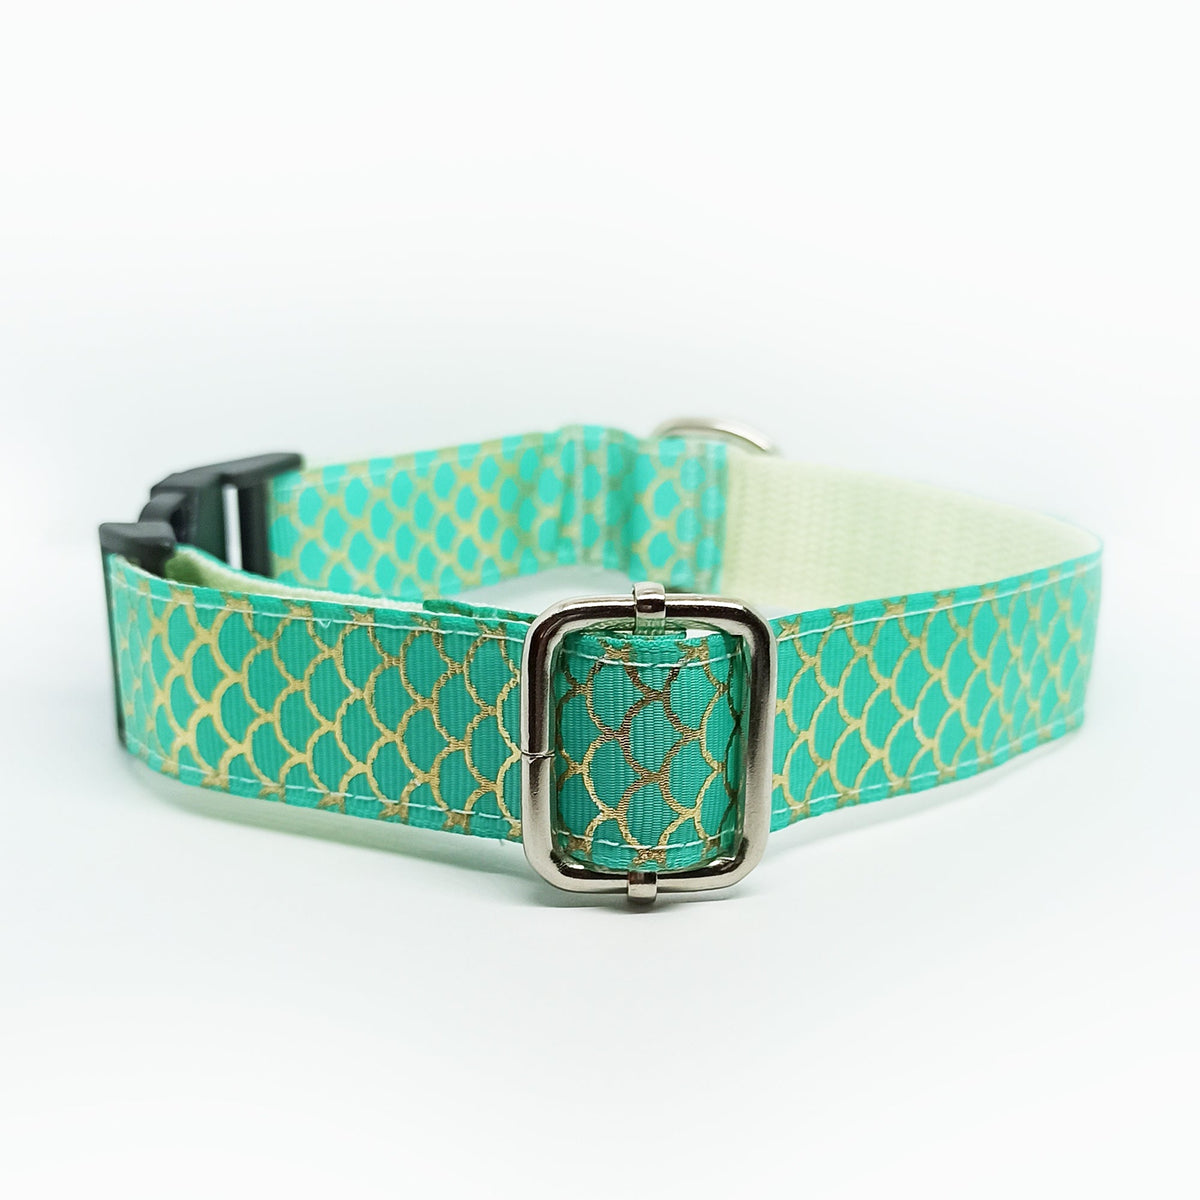 Mintgreen with Gold Scale Pattern Dog Collar - S-L sizes with custom matching pet tag - Adventures of Rubi